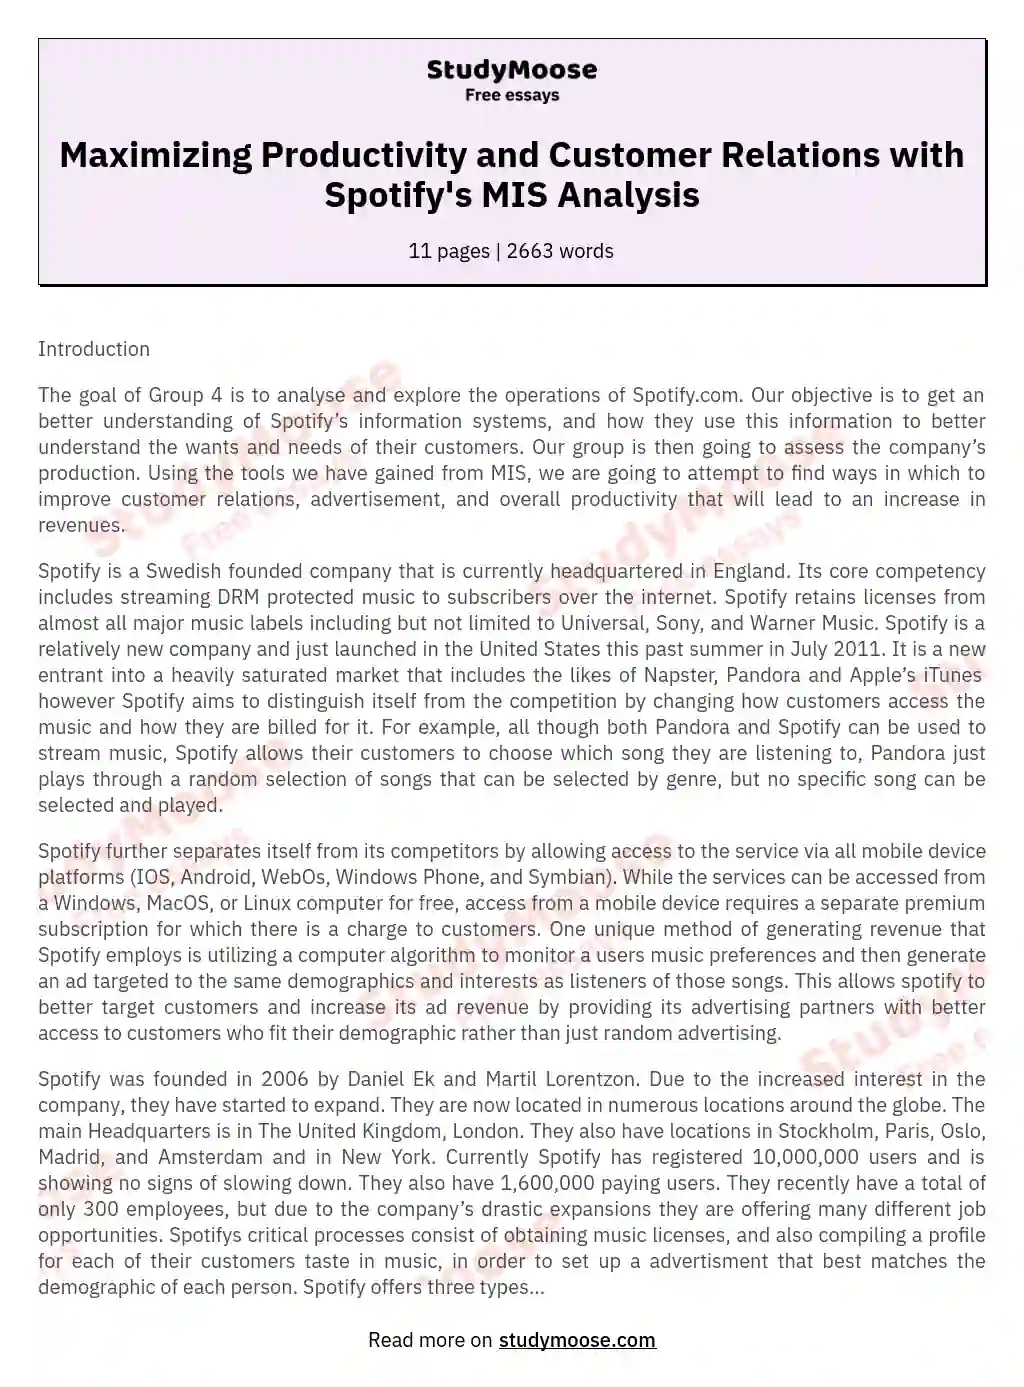 Maximizing Productivity and Customer Relations with Spotify's MIS Analysis essay